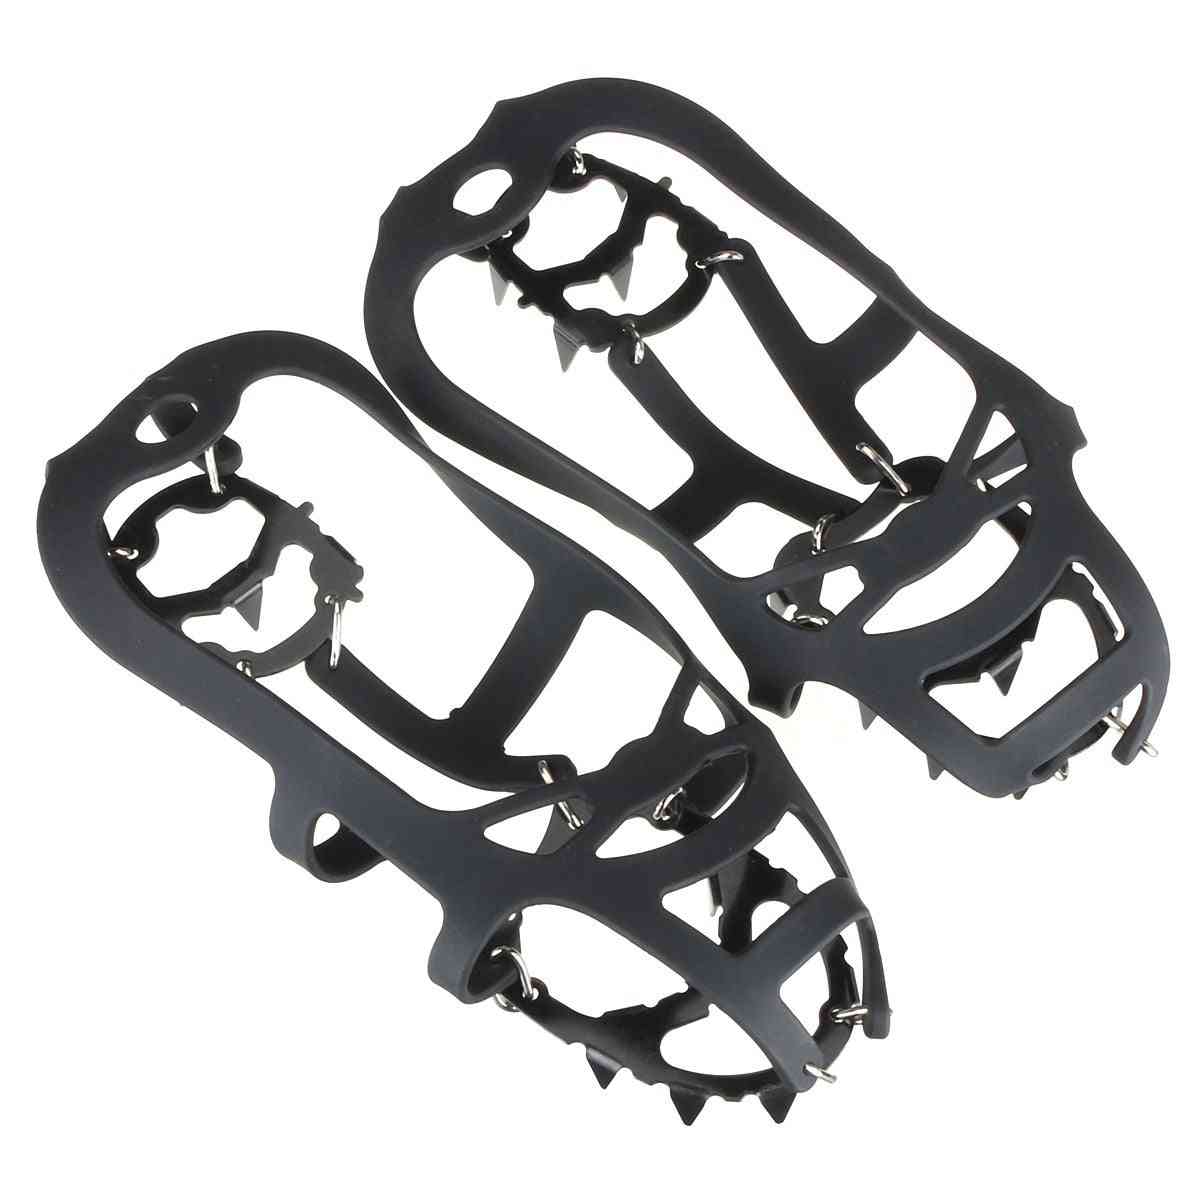 Crampons antidérapants, crampons à crampons pour chaussures